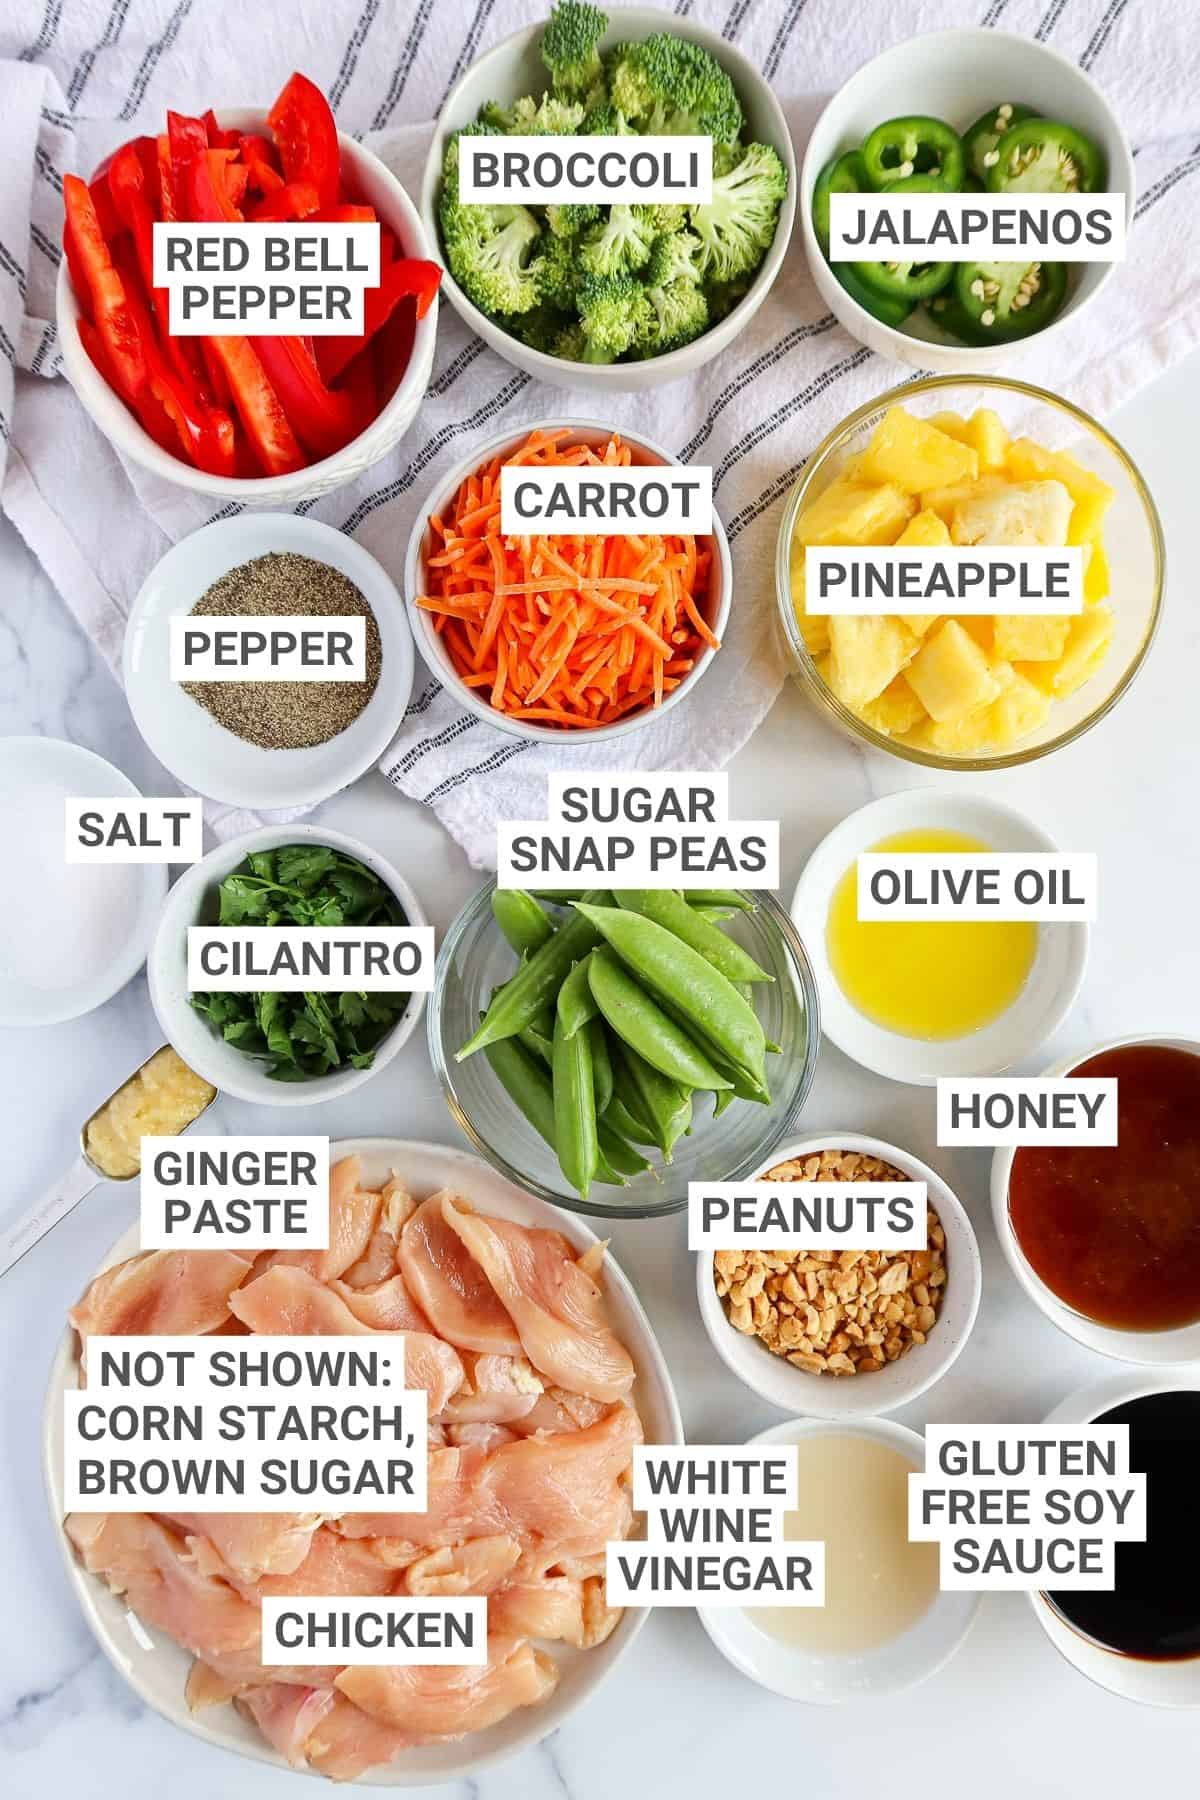 Spicy chicken stir fry ingredients with text overlay labels.